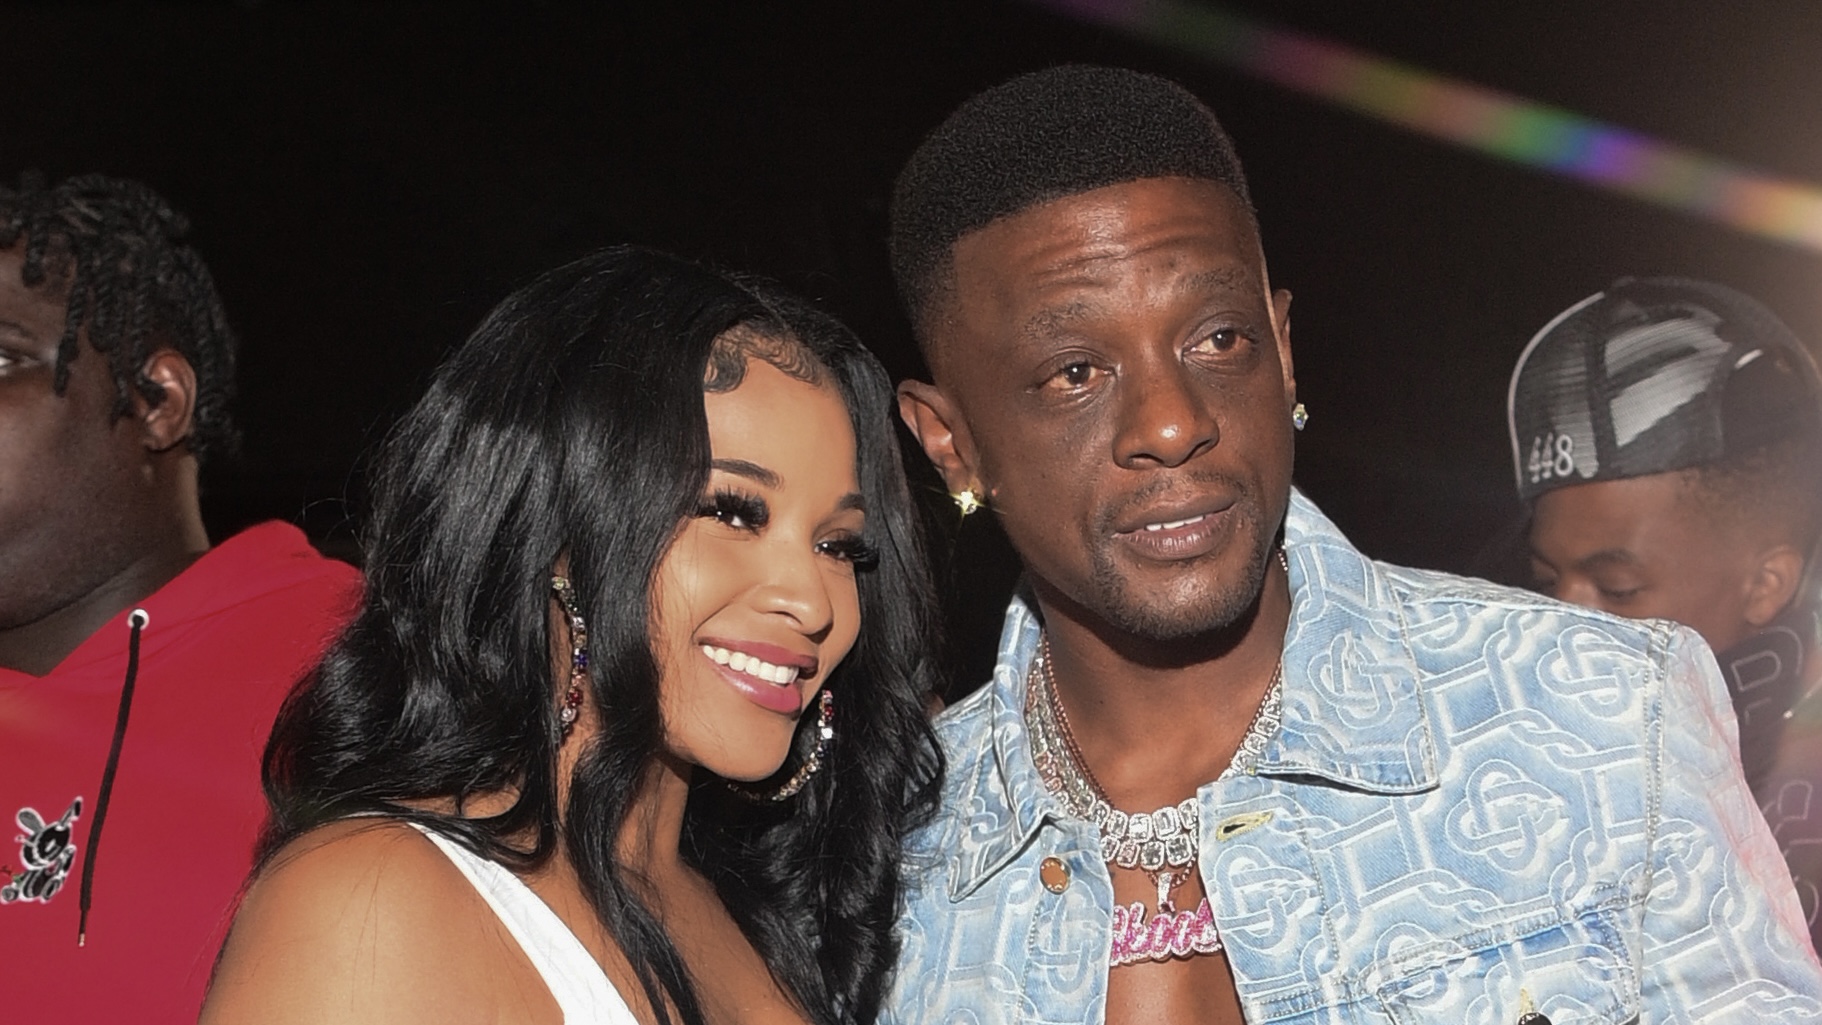 Issa Fiancé! Boosie Reveals Upcoming Wedding Date During Latest Federal Court Appearance